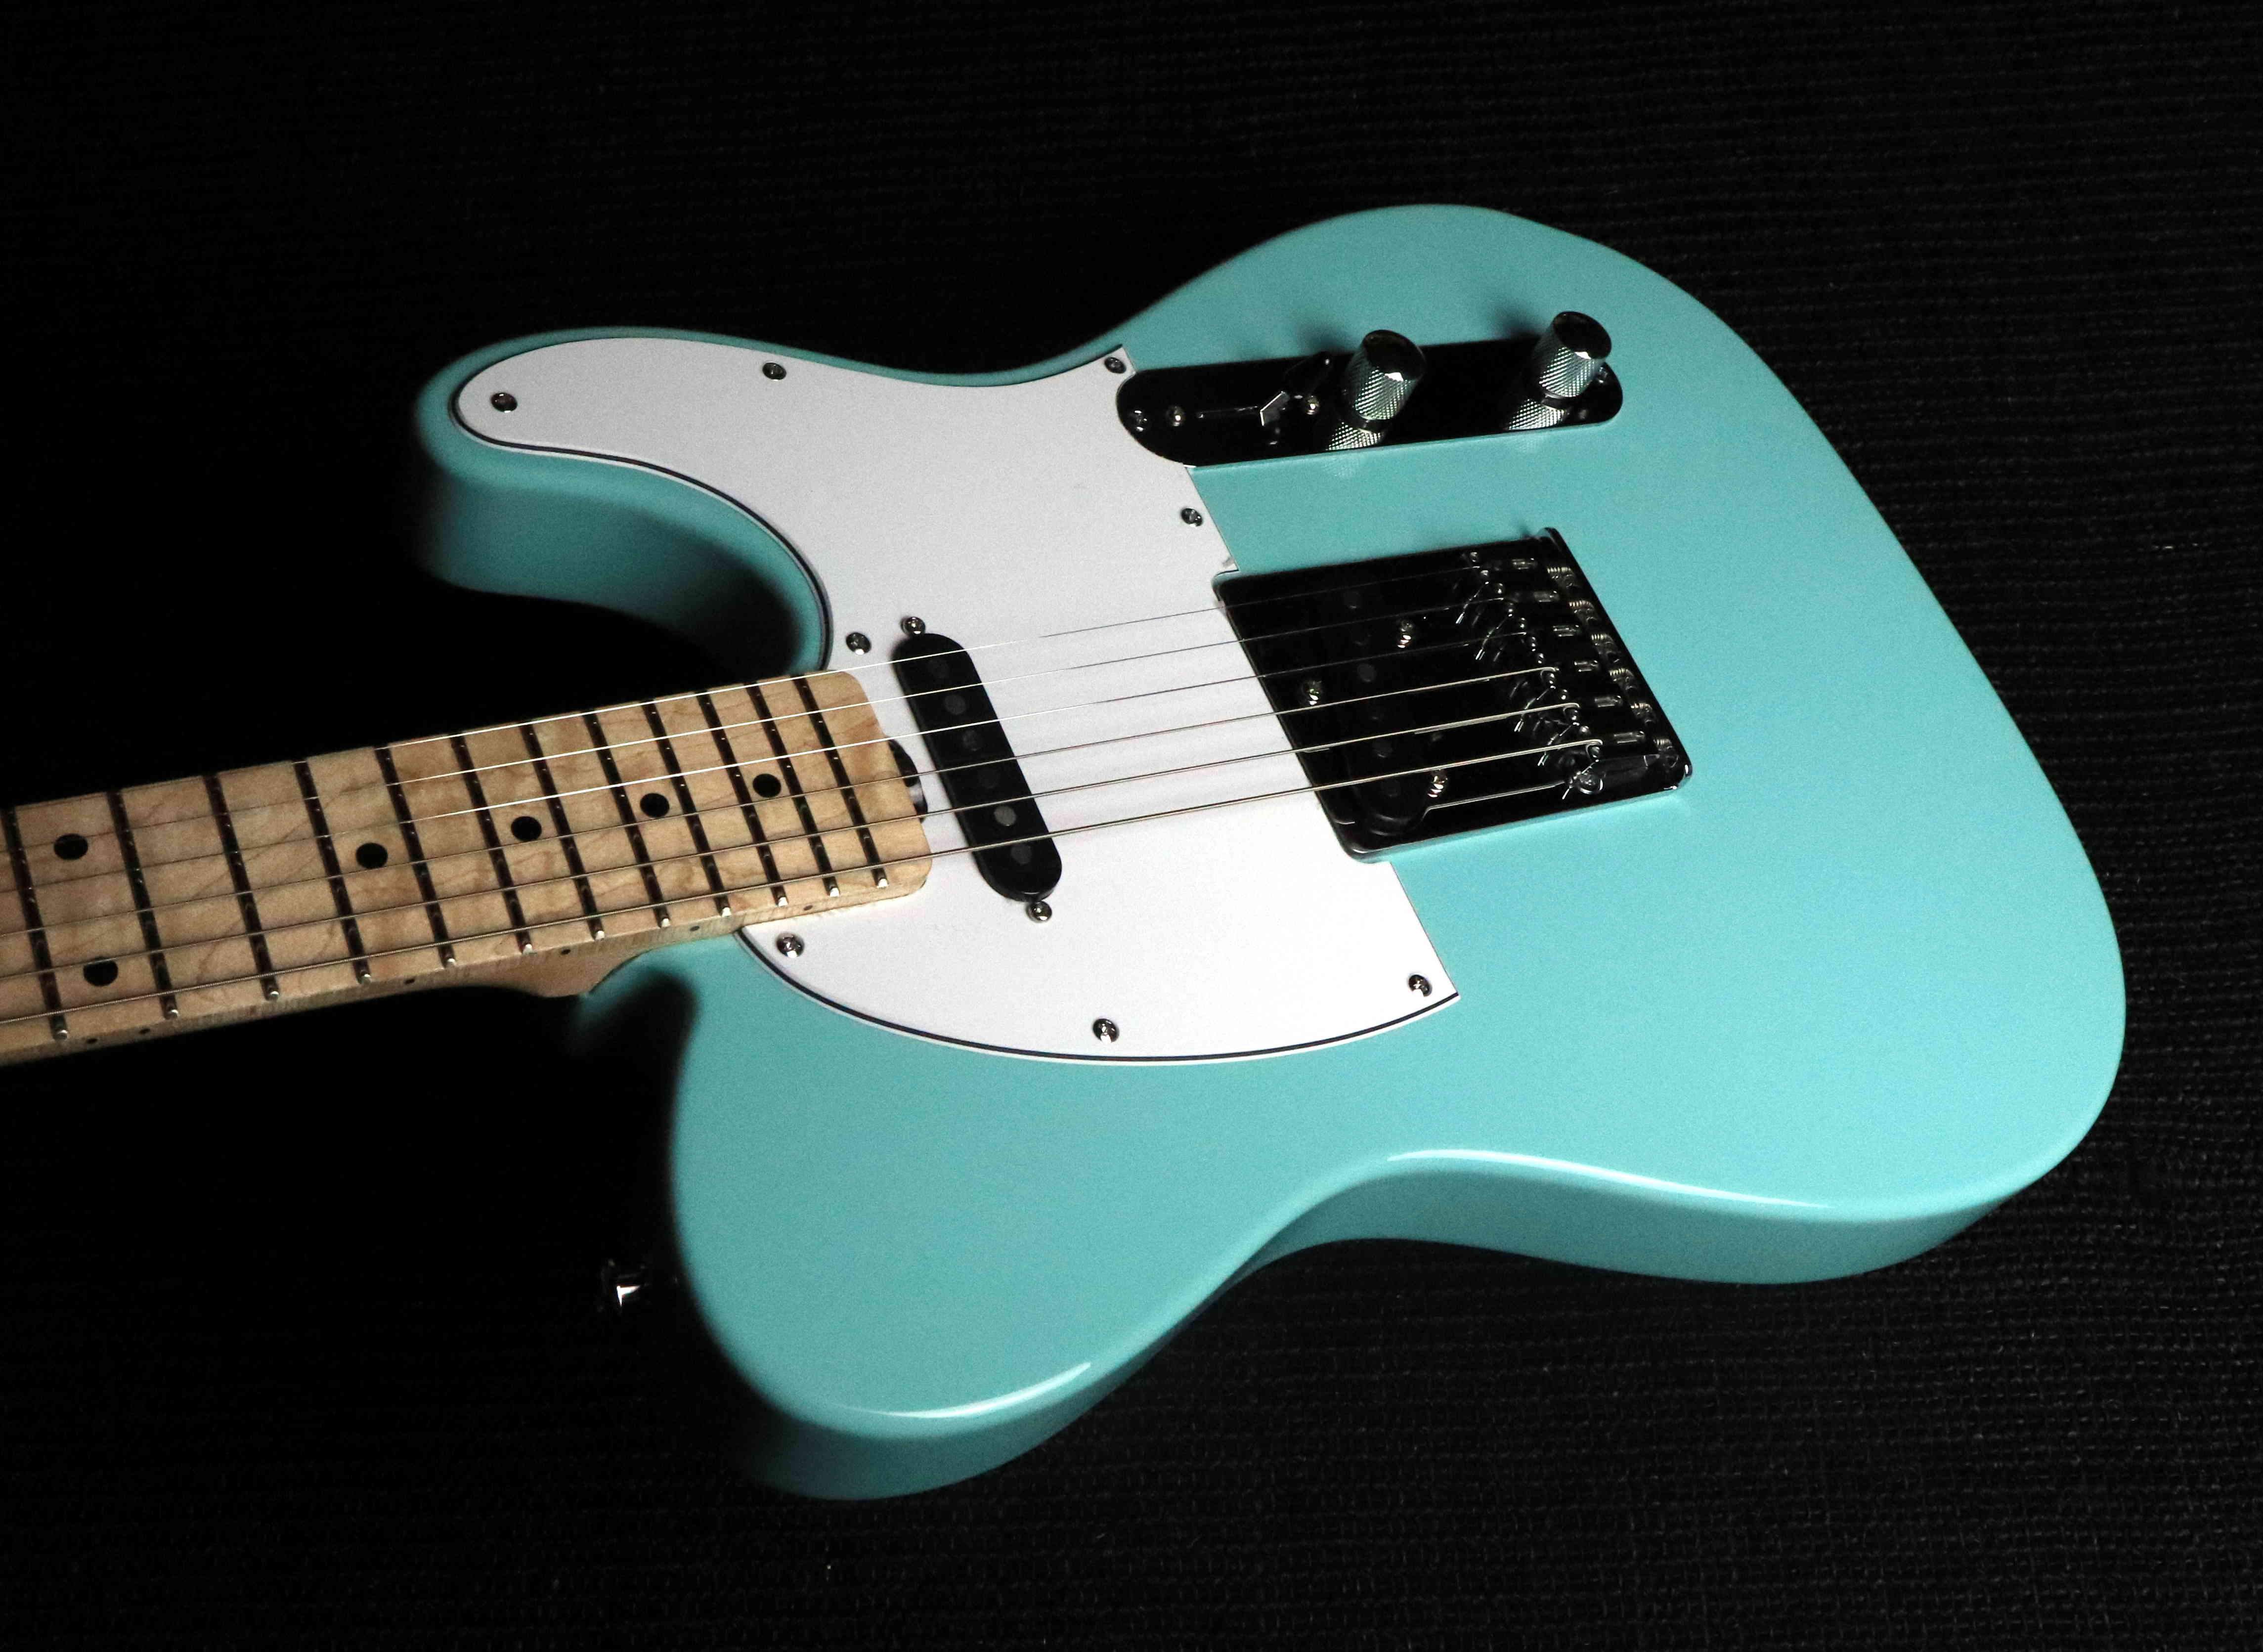 Gordon Smith Classic T Sea Foam Green Maple Neck, Electric Guitar for sale at Richards Guitars.